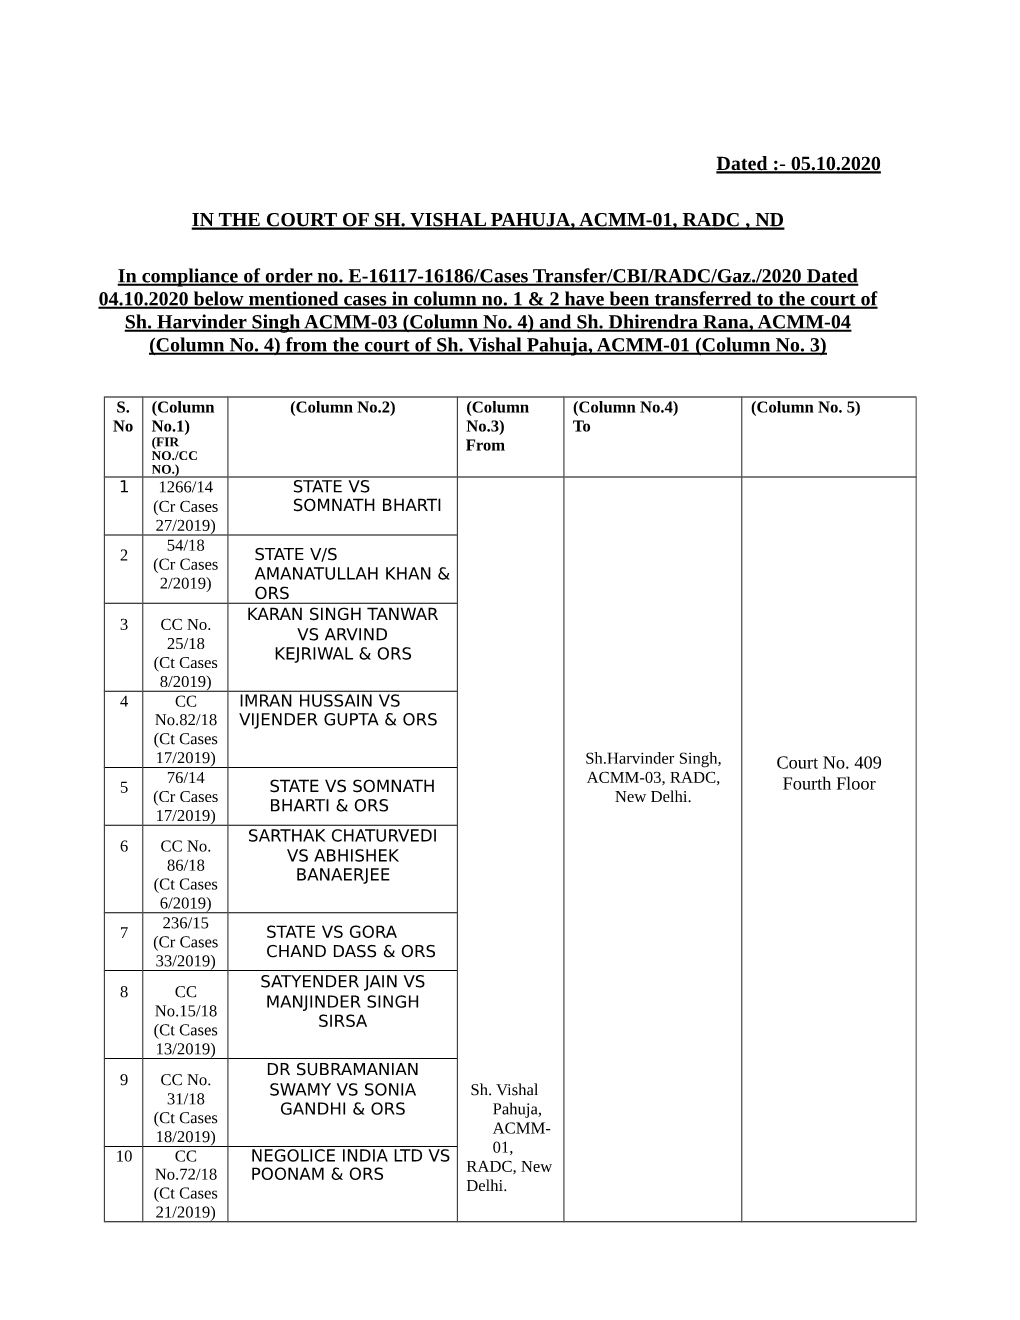 List of Cases Withdrawn from the Court of Sh Vishal Pahuja Ld ACMM And